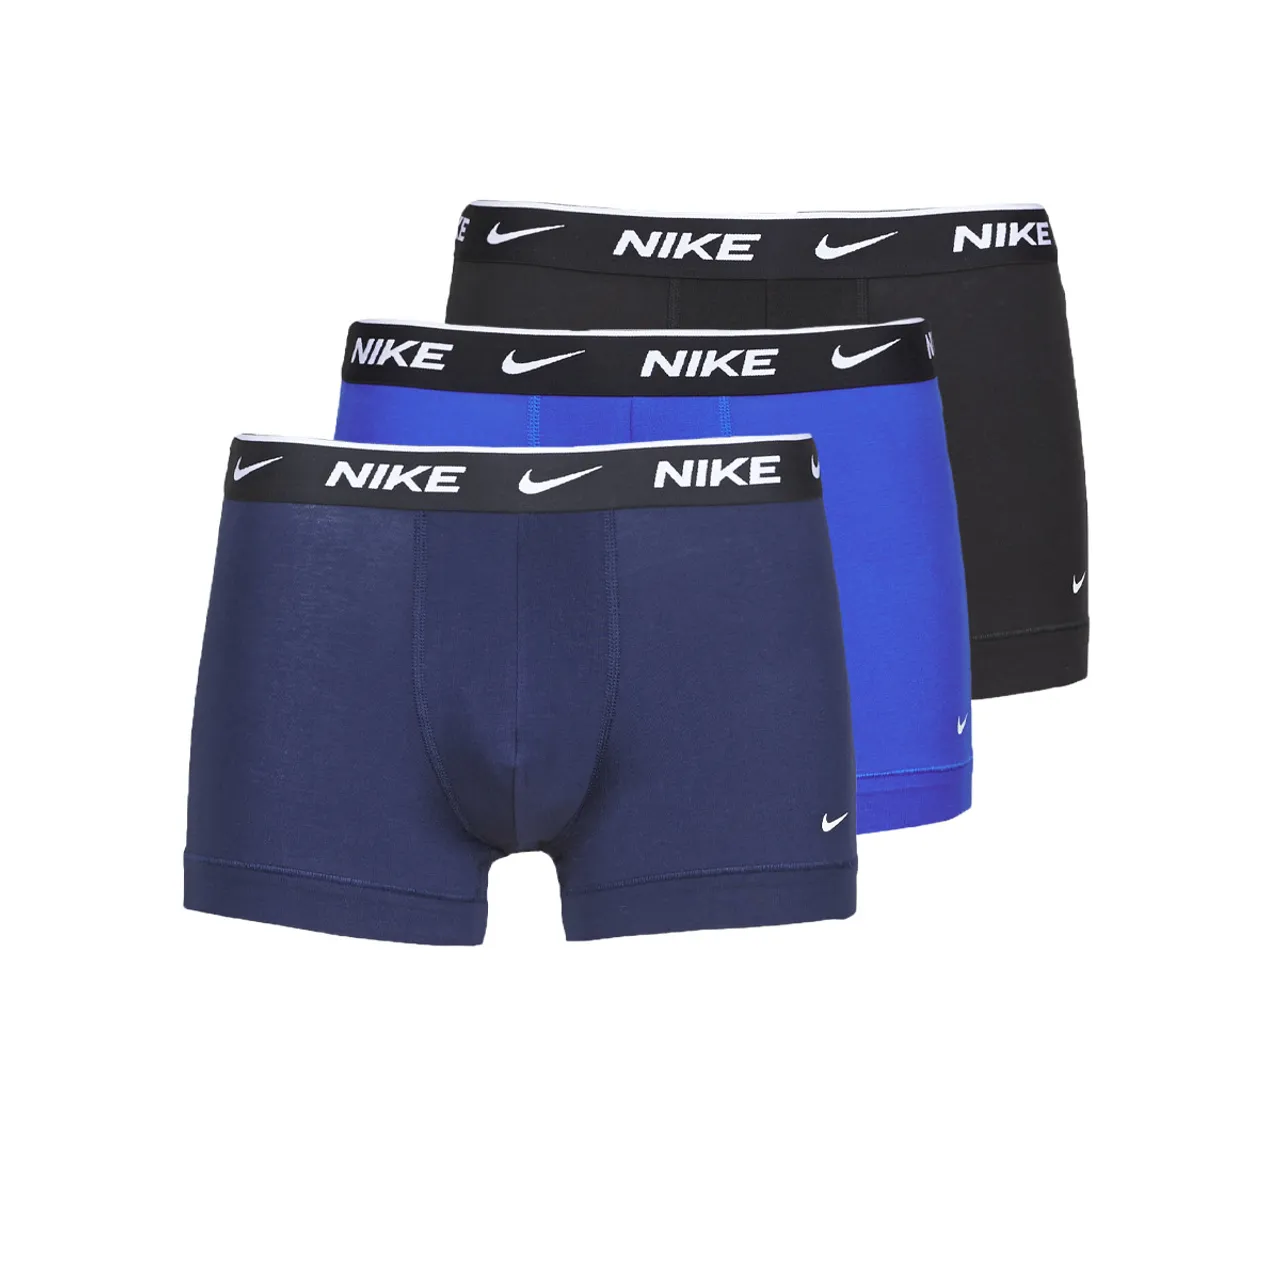 Nike  EVERYDAY COTTON STRETCH X3  men's Boxer shorts in Black